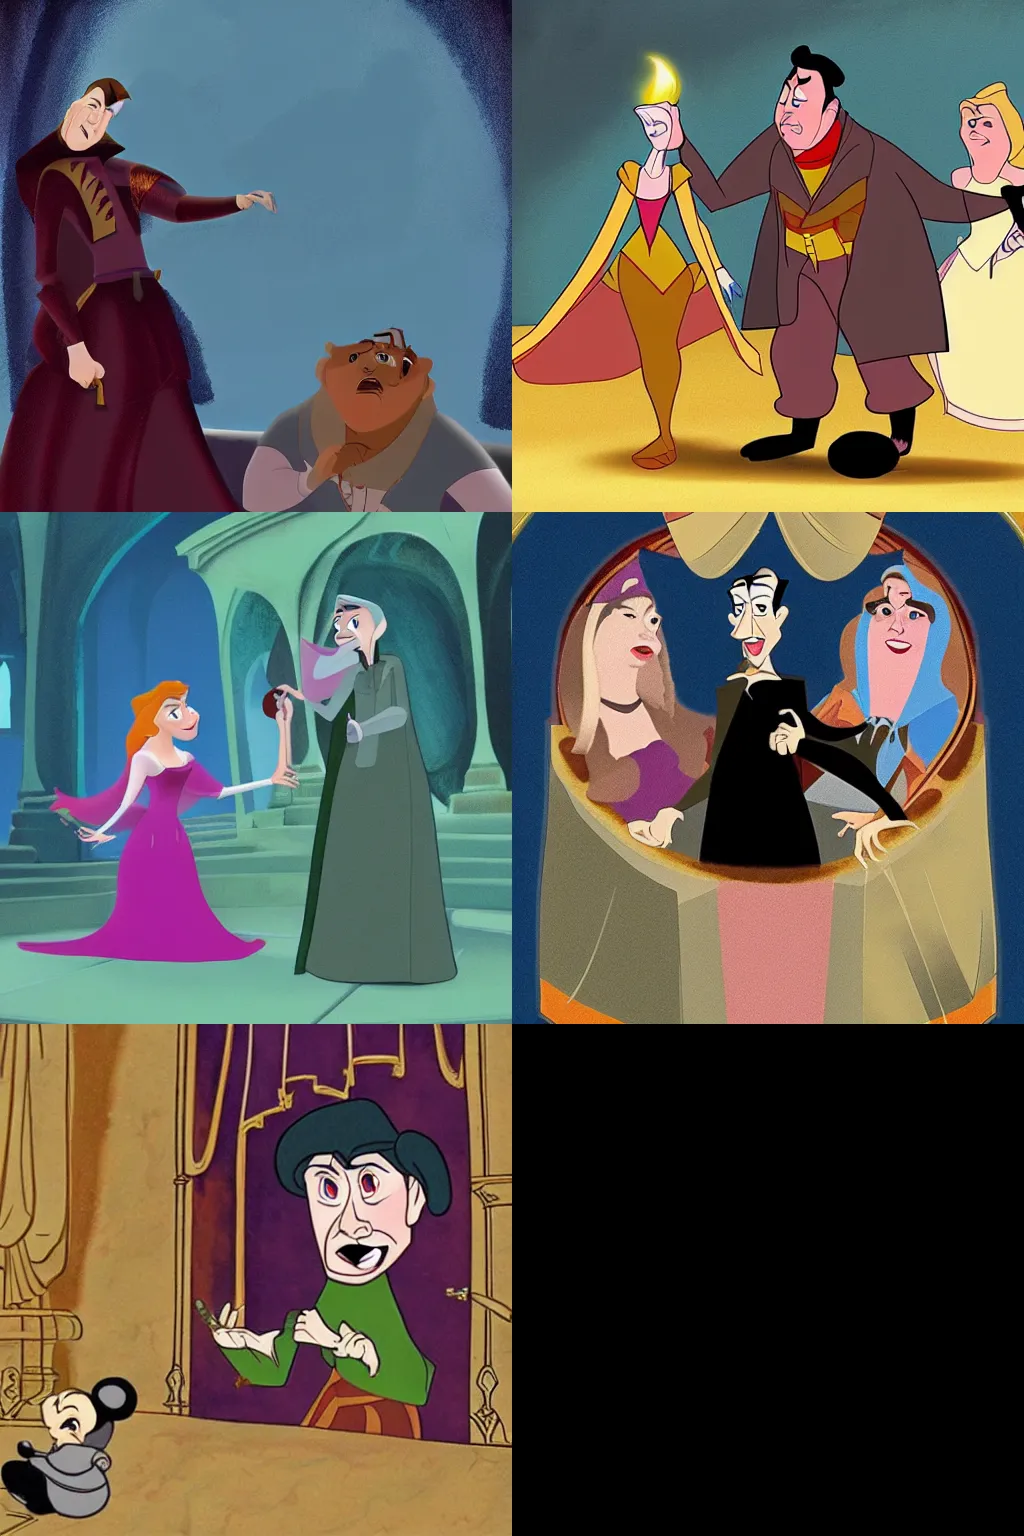 Prompt: Tragedy of Hamlet as a Disney animation